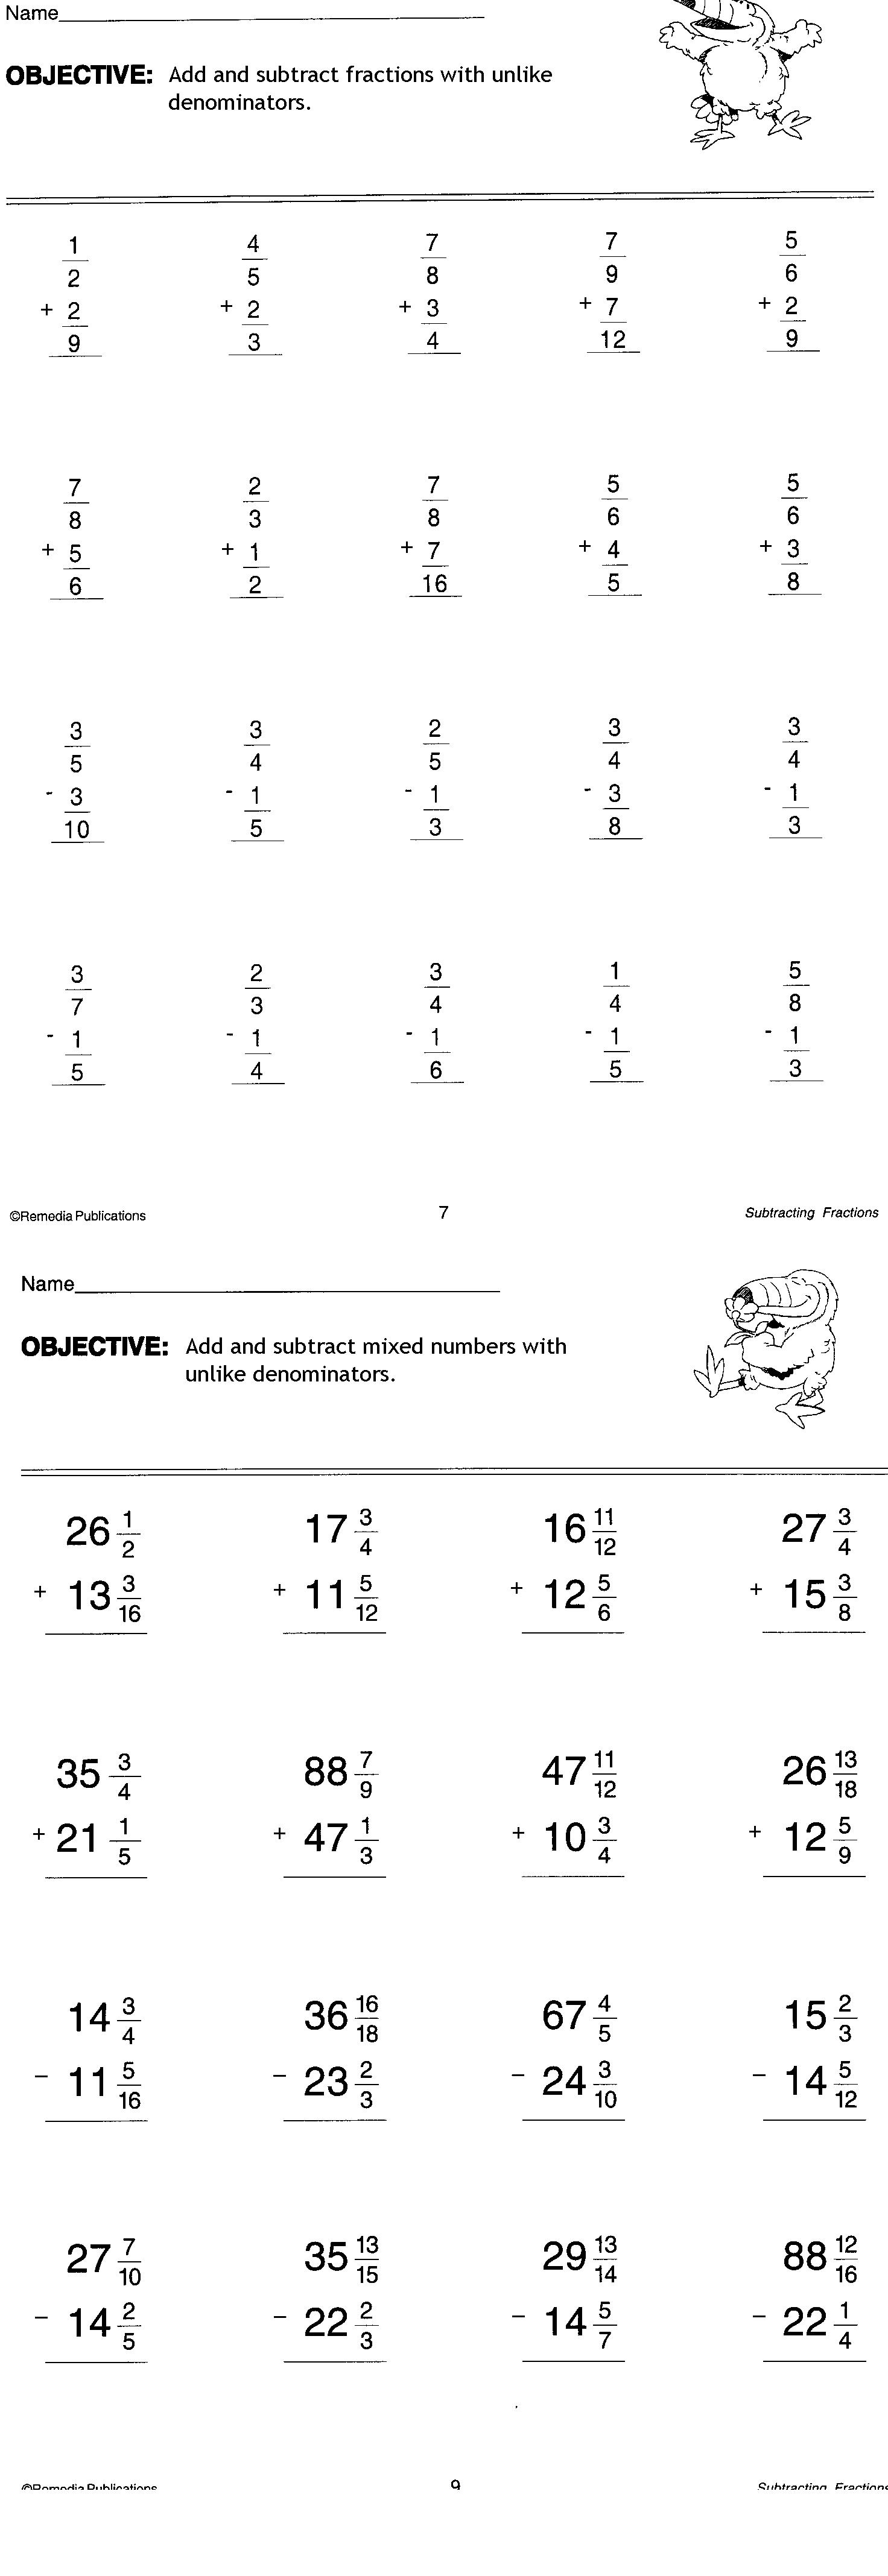 Subtracting Fraction Worksheets 7th Grade